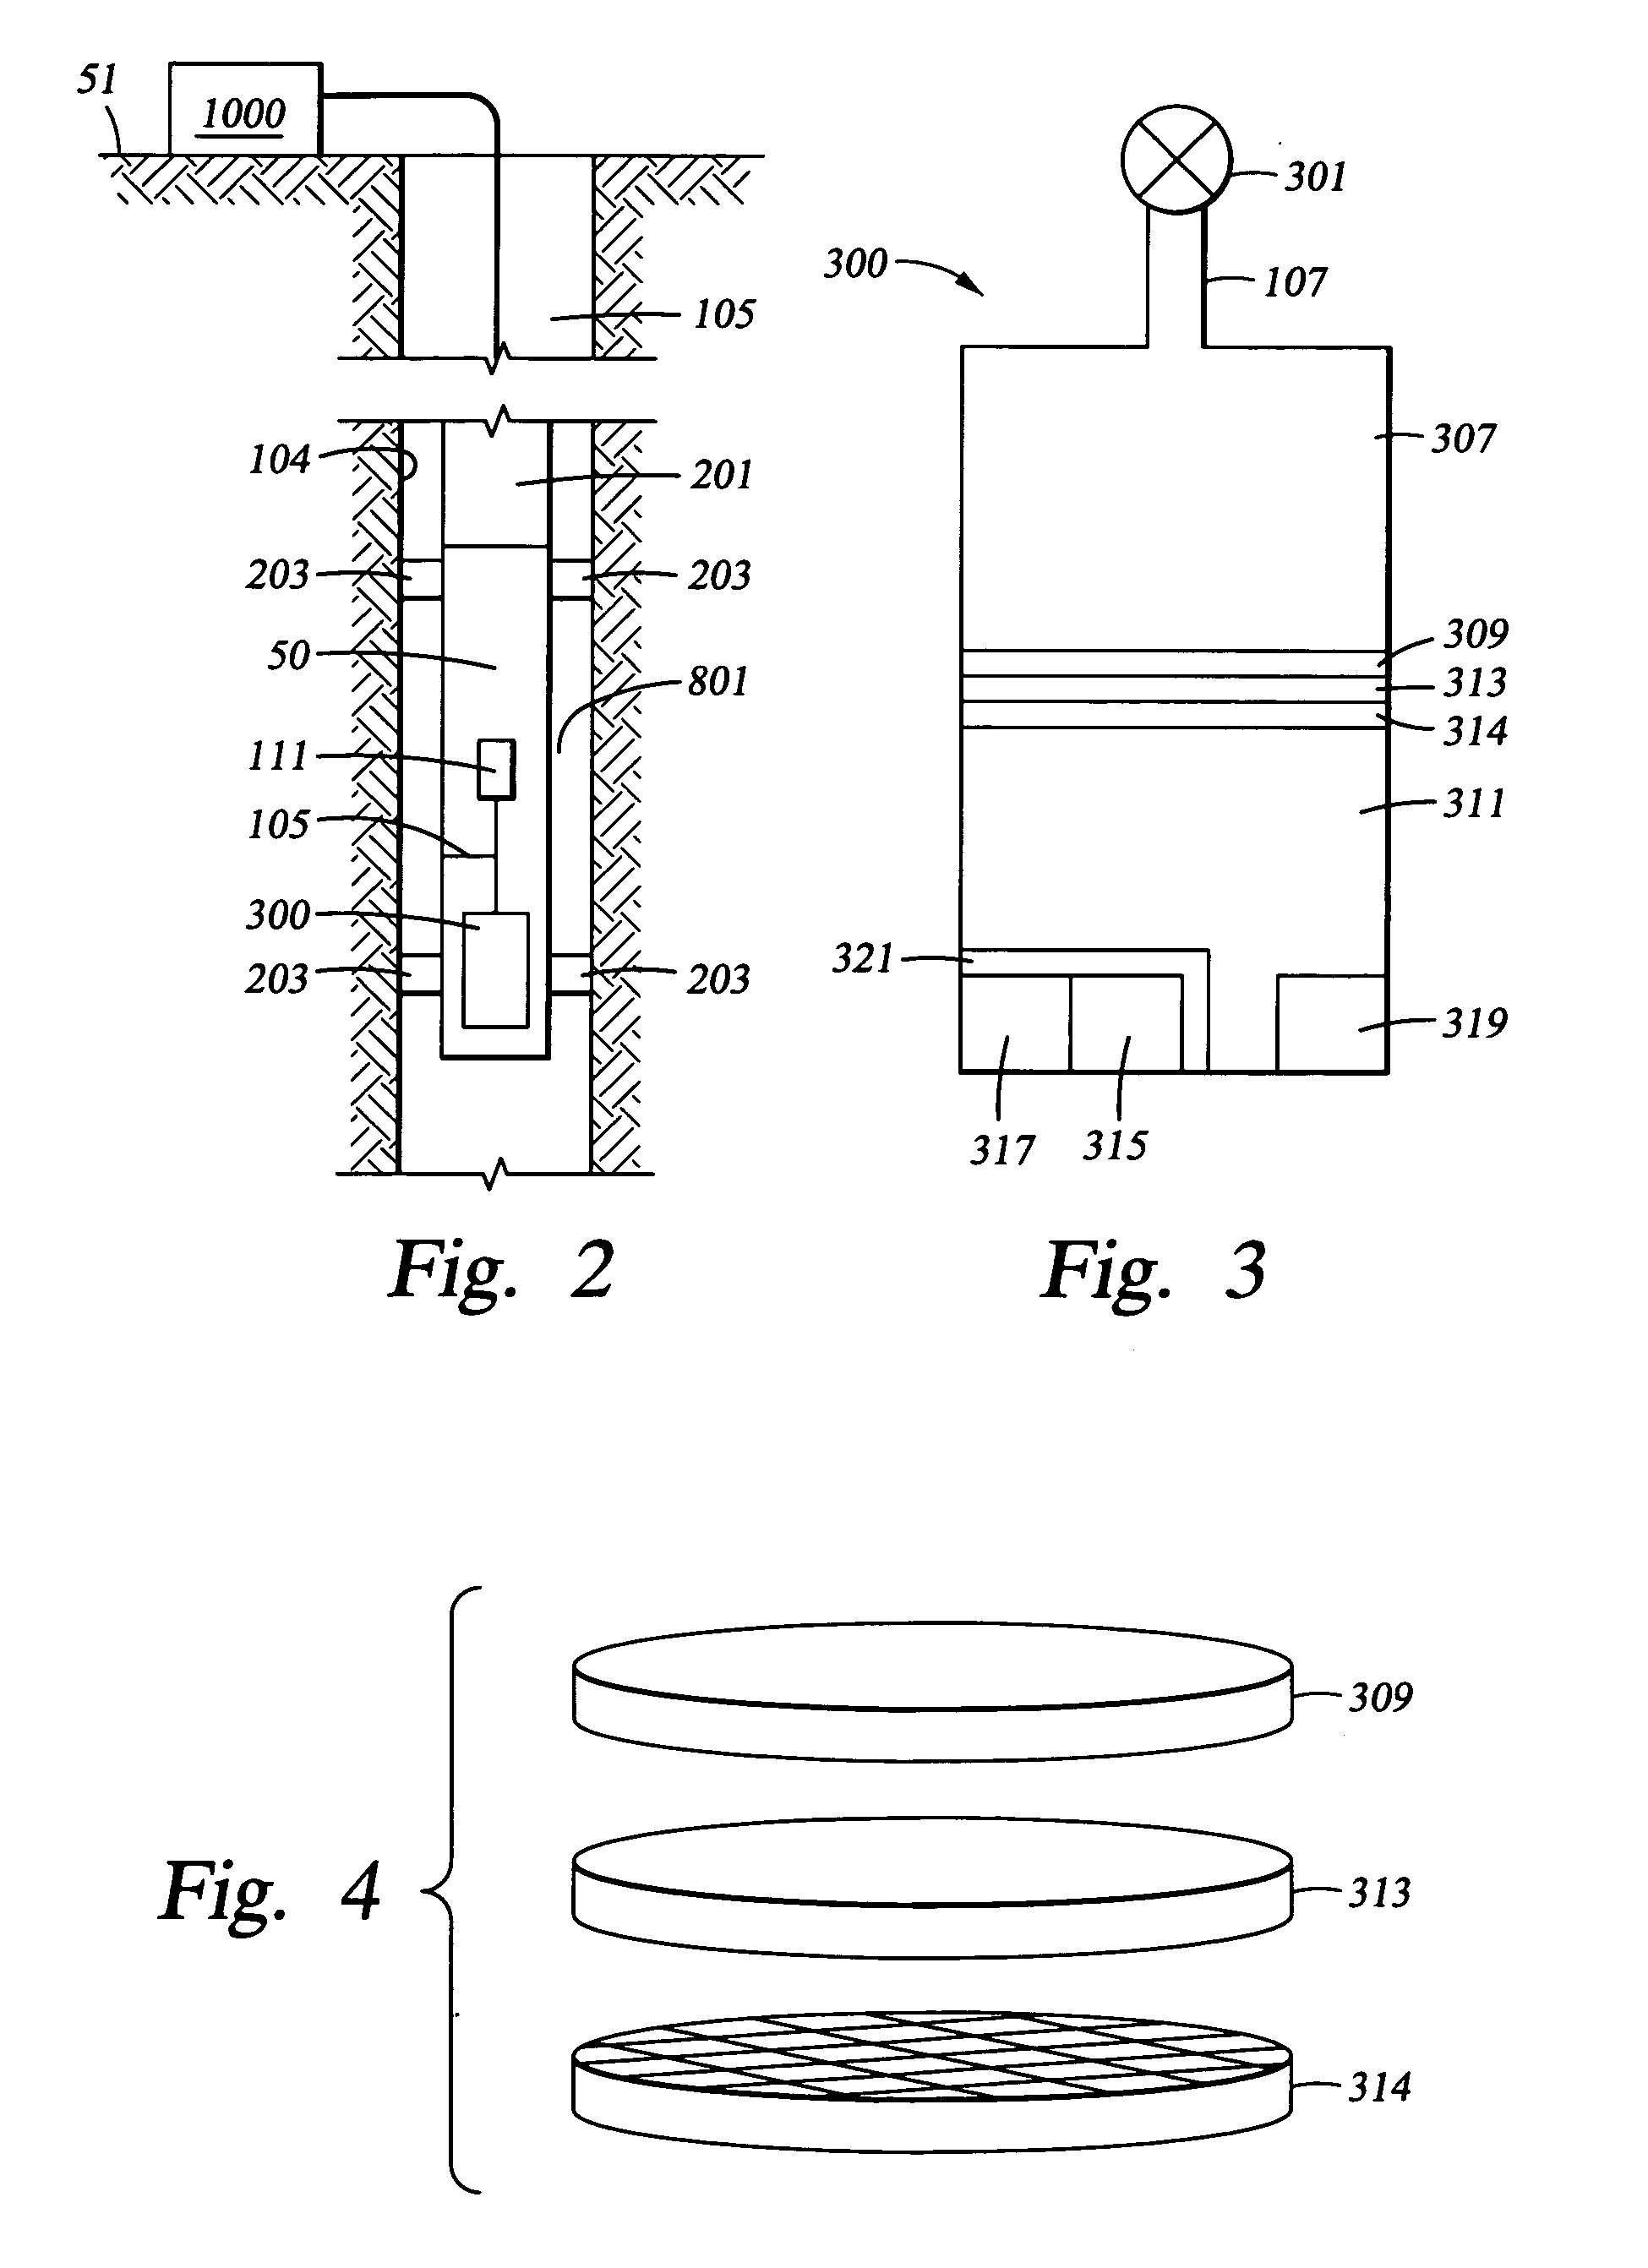 Method and apparatus for downhole fluid analysis for reservoir fluid characterization